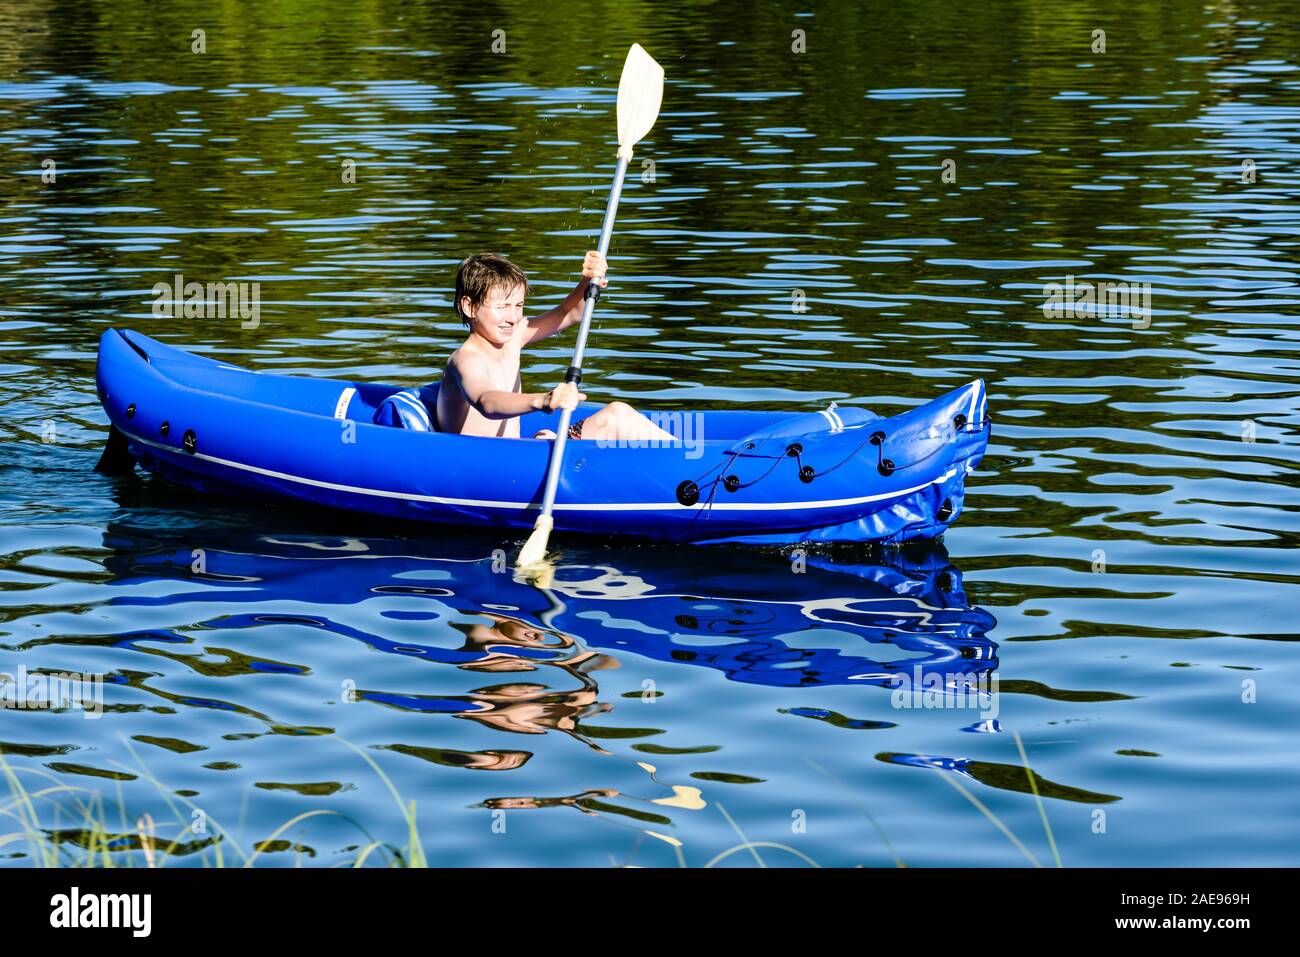 Boy, 12 years, paddling in a rubber boat on the Silbersee bathing lake, Celle, Lower Saxony, Germany Stock Photo